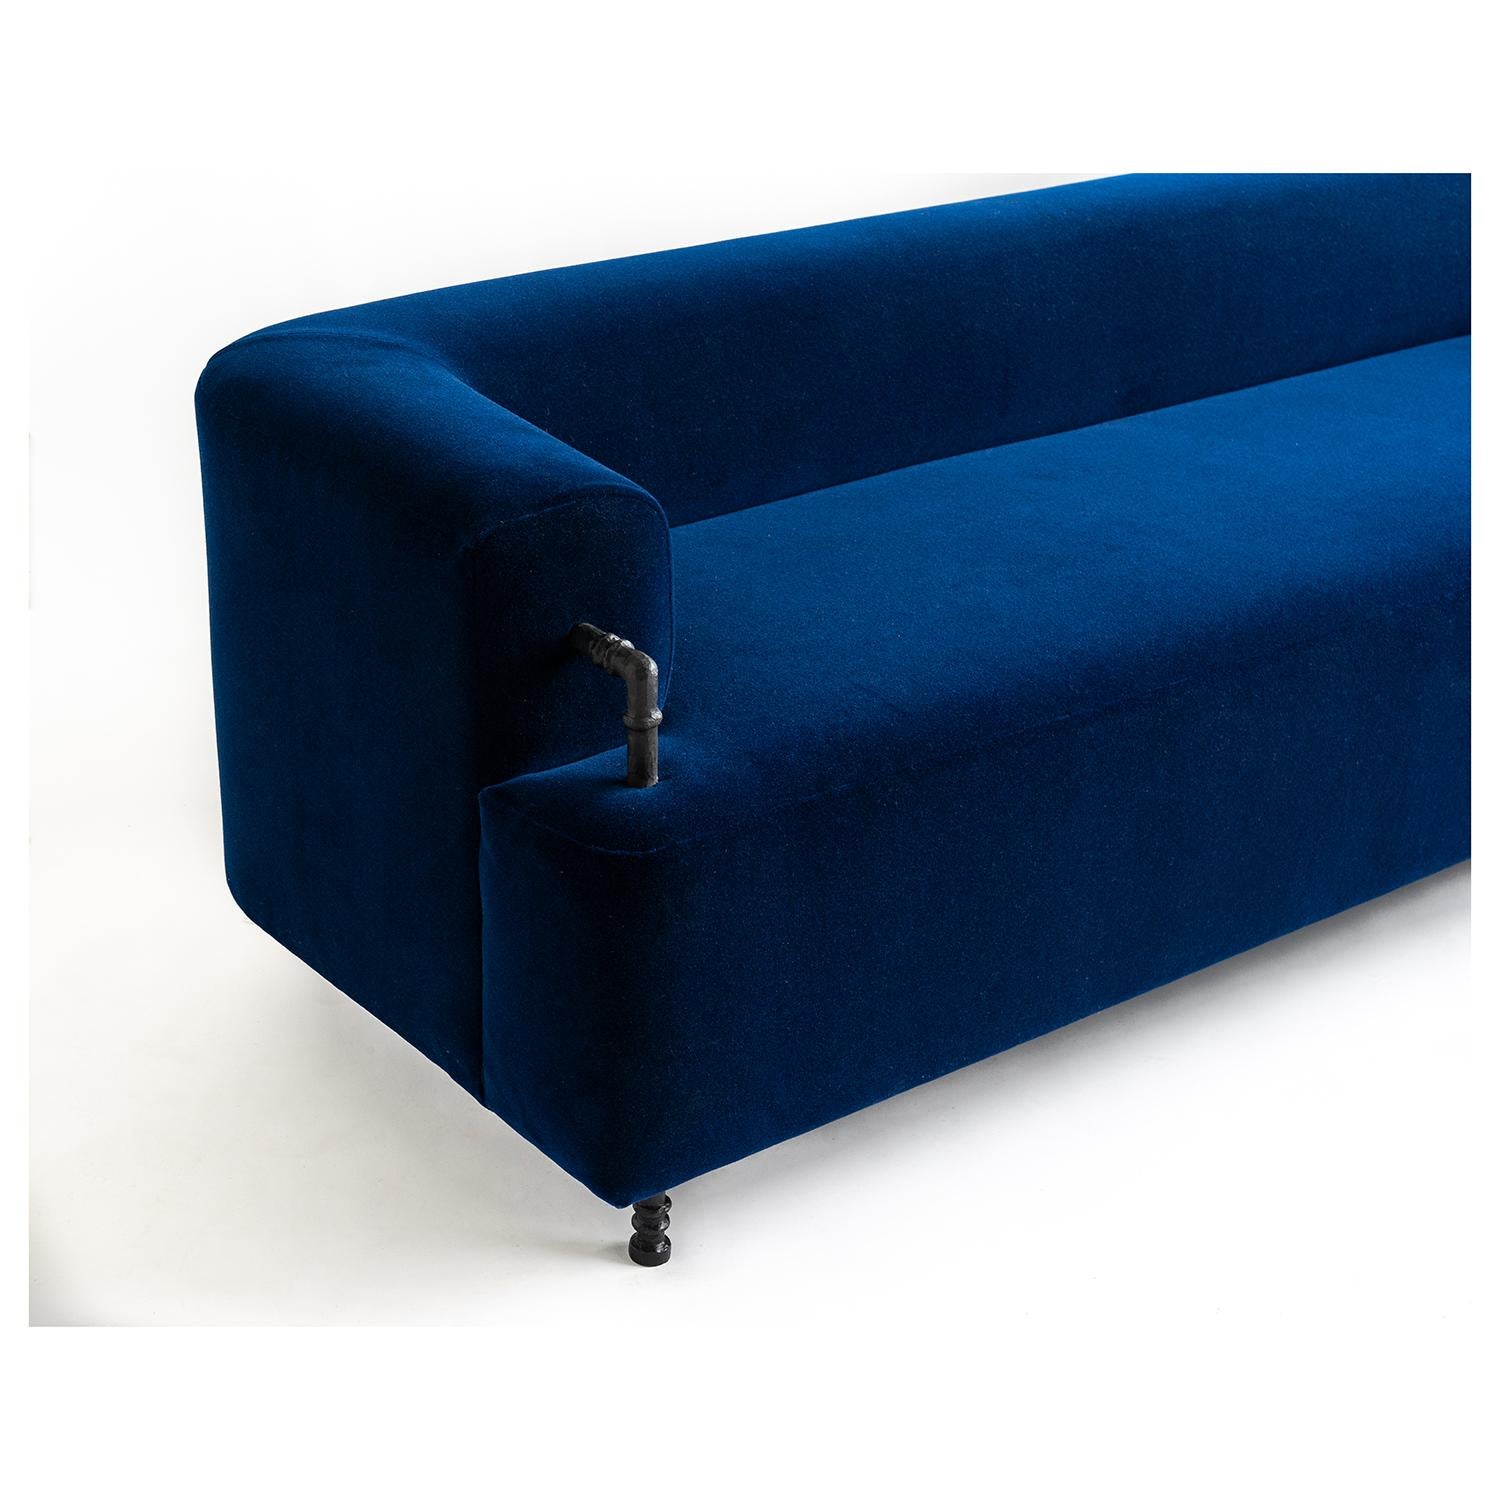 American Sofa in Knoll Textile Plush Mohair with Simple Hand Carved Steel Elements